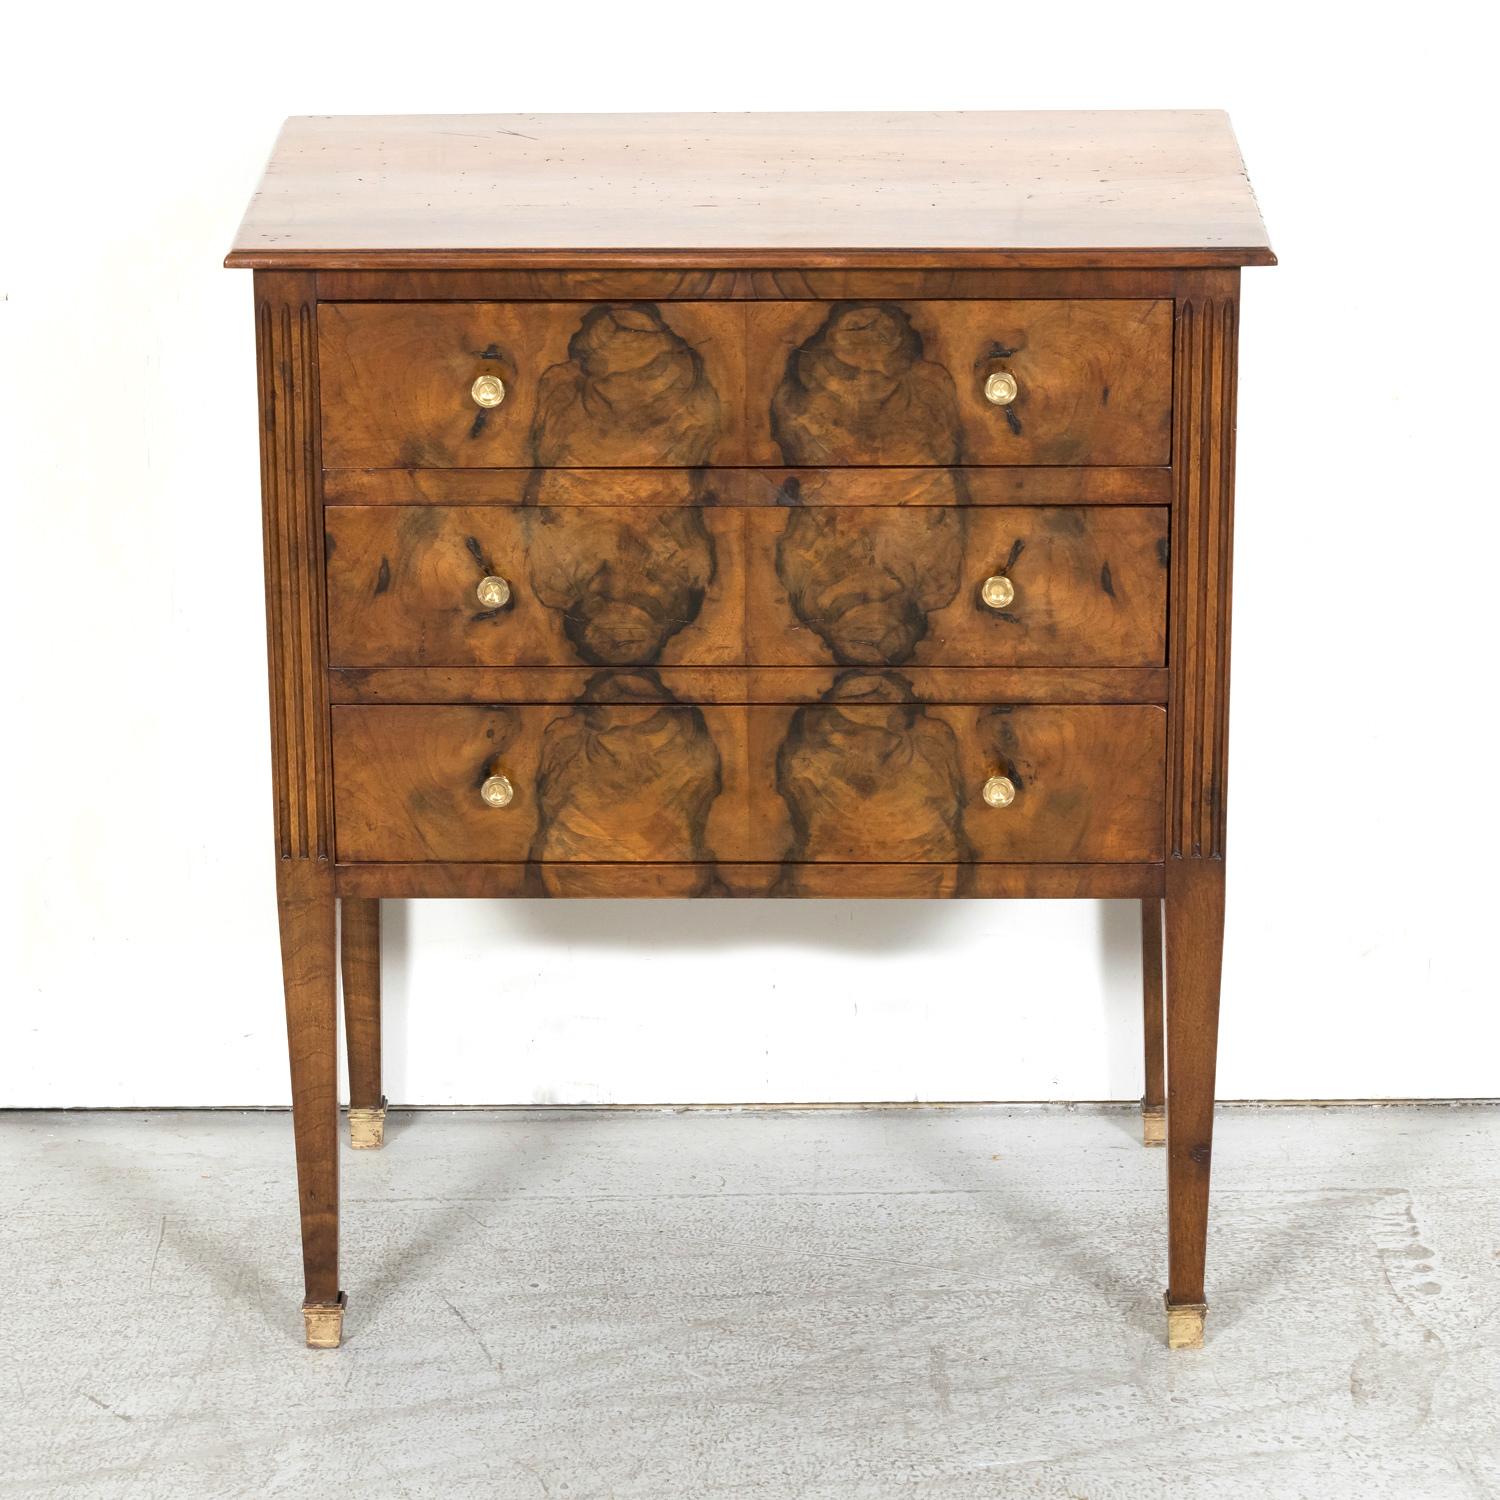 A handsome 19th century French Louis XVI style three-drawer petite commode, circa 1890s, from the port city of Bordeaux, known the world over for its wine. This antique French chest of drawers is handcrafted of meticulously bookmatched walnut and